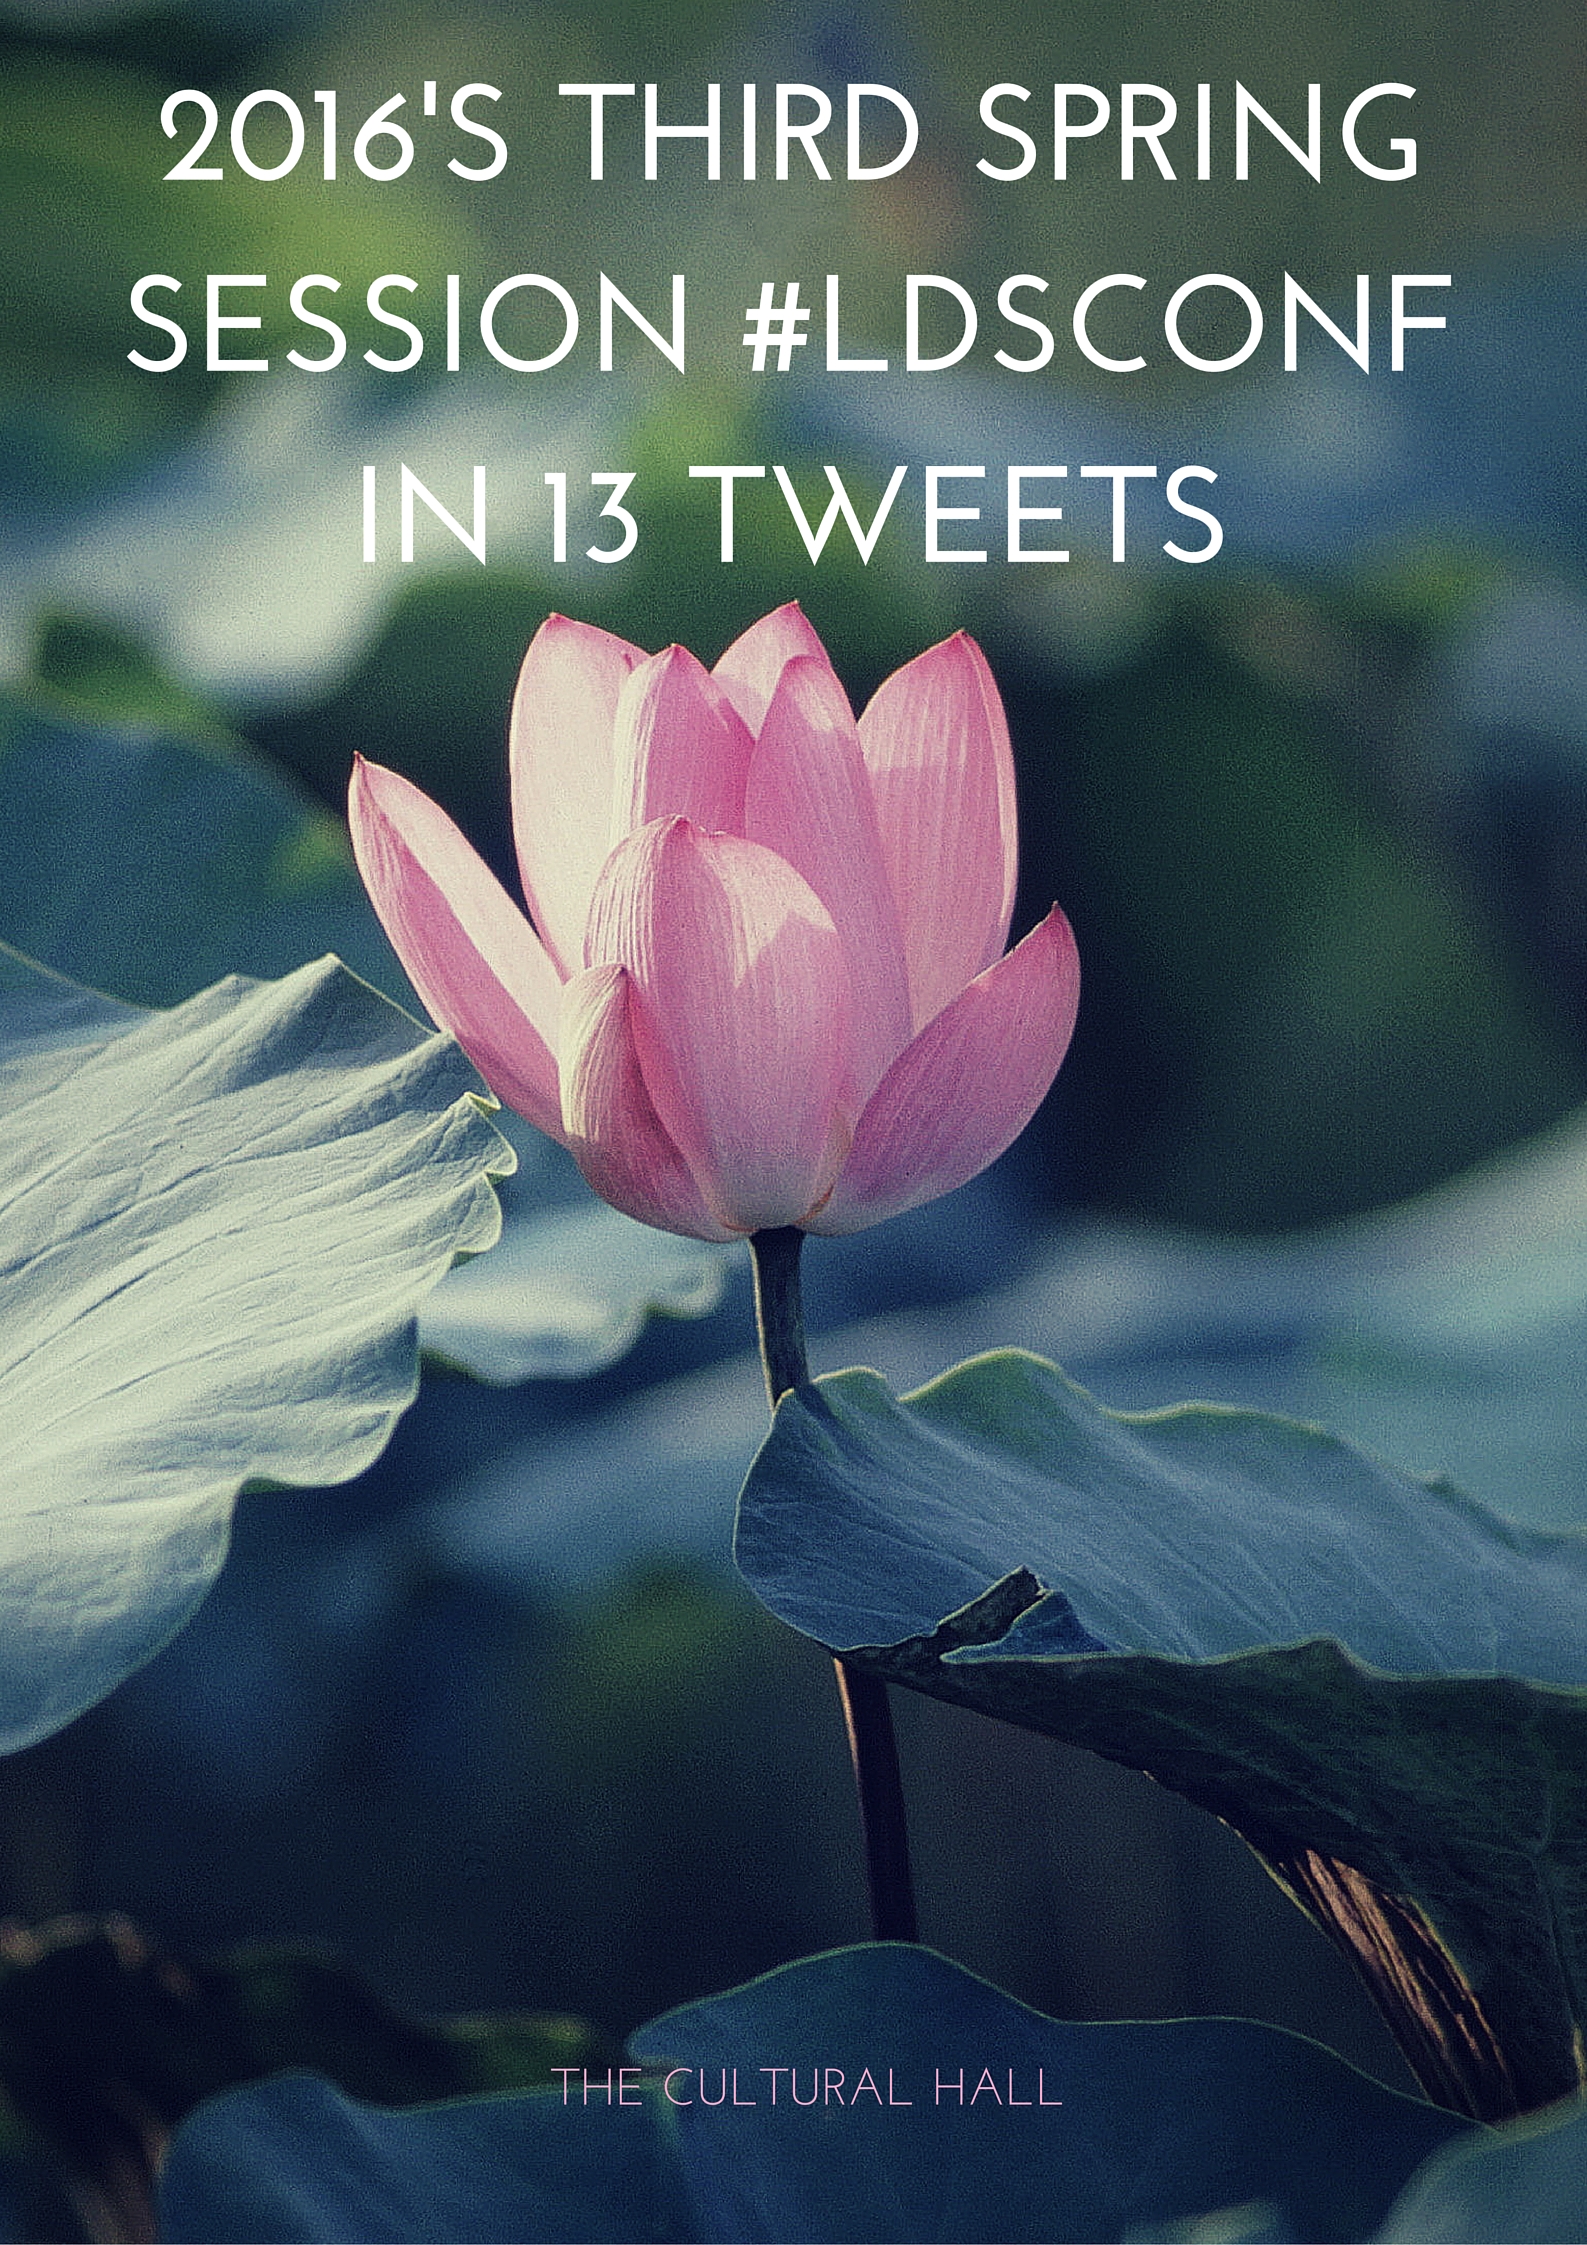 2016’s third spring session #LDSConf in 13 tweets